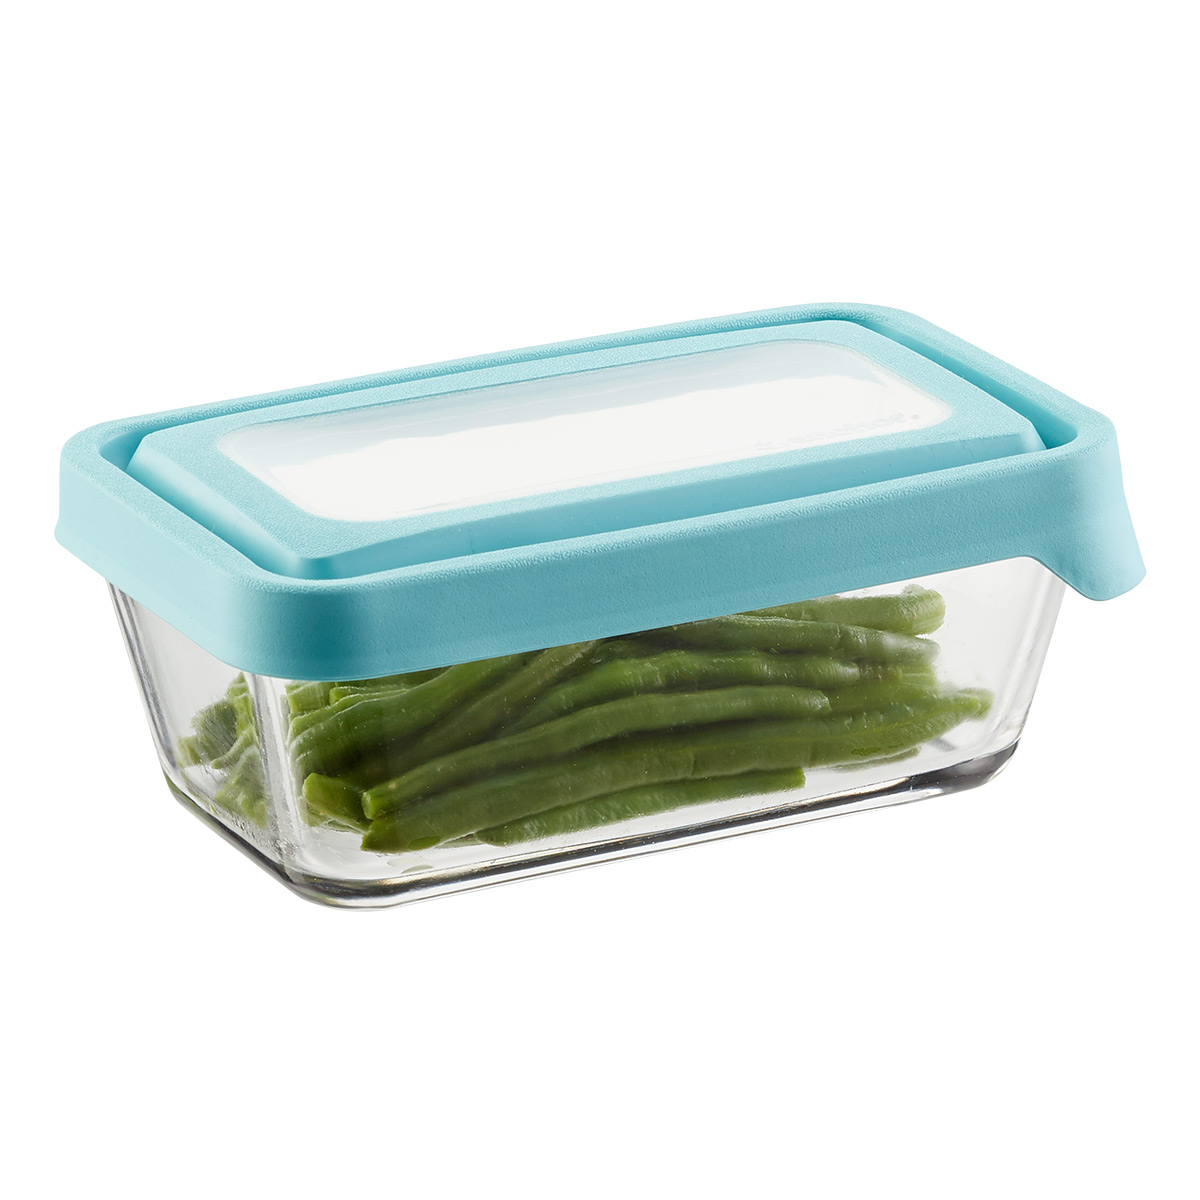 Anchor Hocking TrueLock Locking Lid Glass Food Storage Containers, 6 Cup  Rectangular